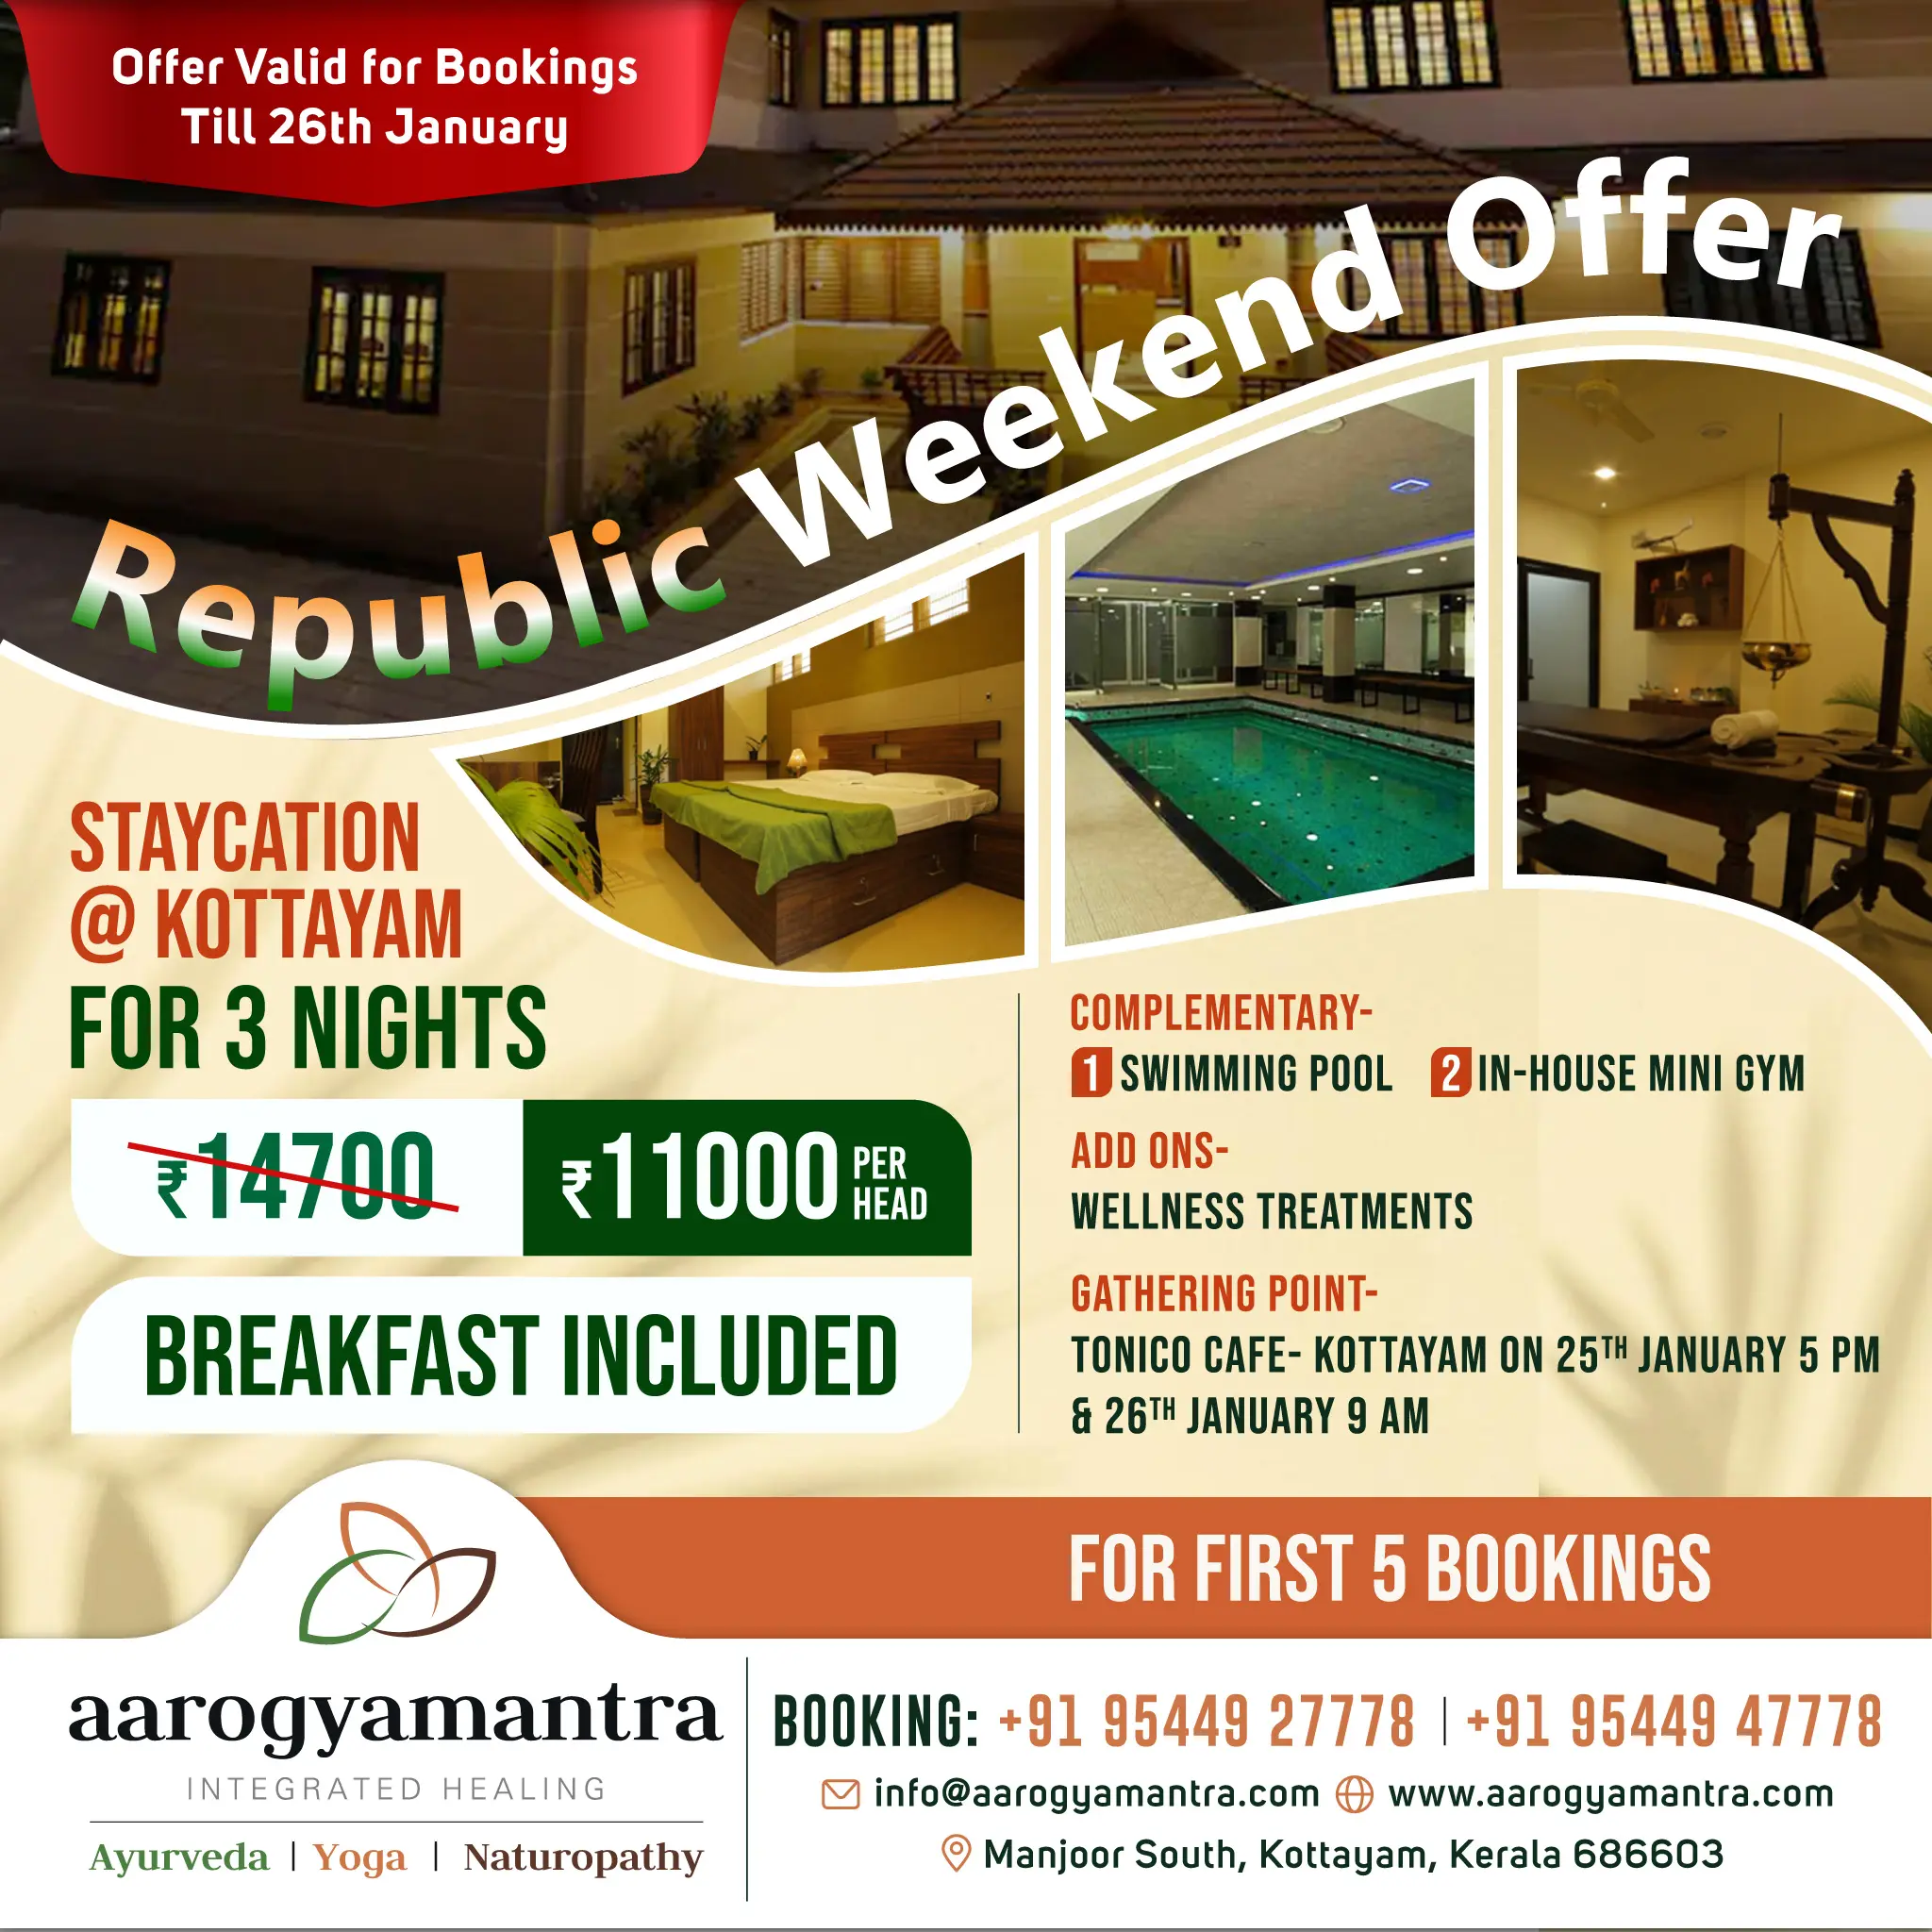 3 day staycation in Kottayam with Republic Weekend Offer . . . !